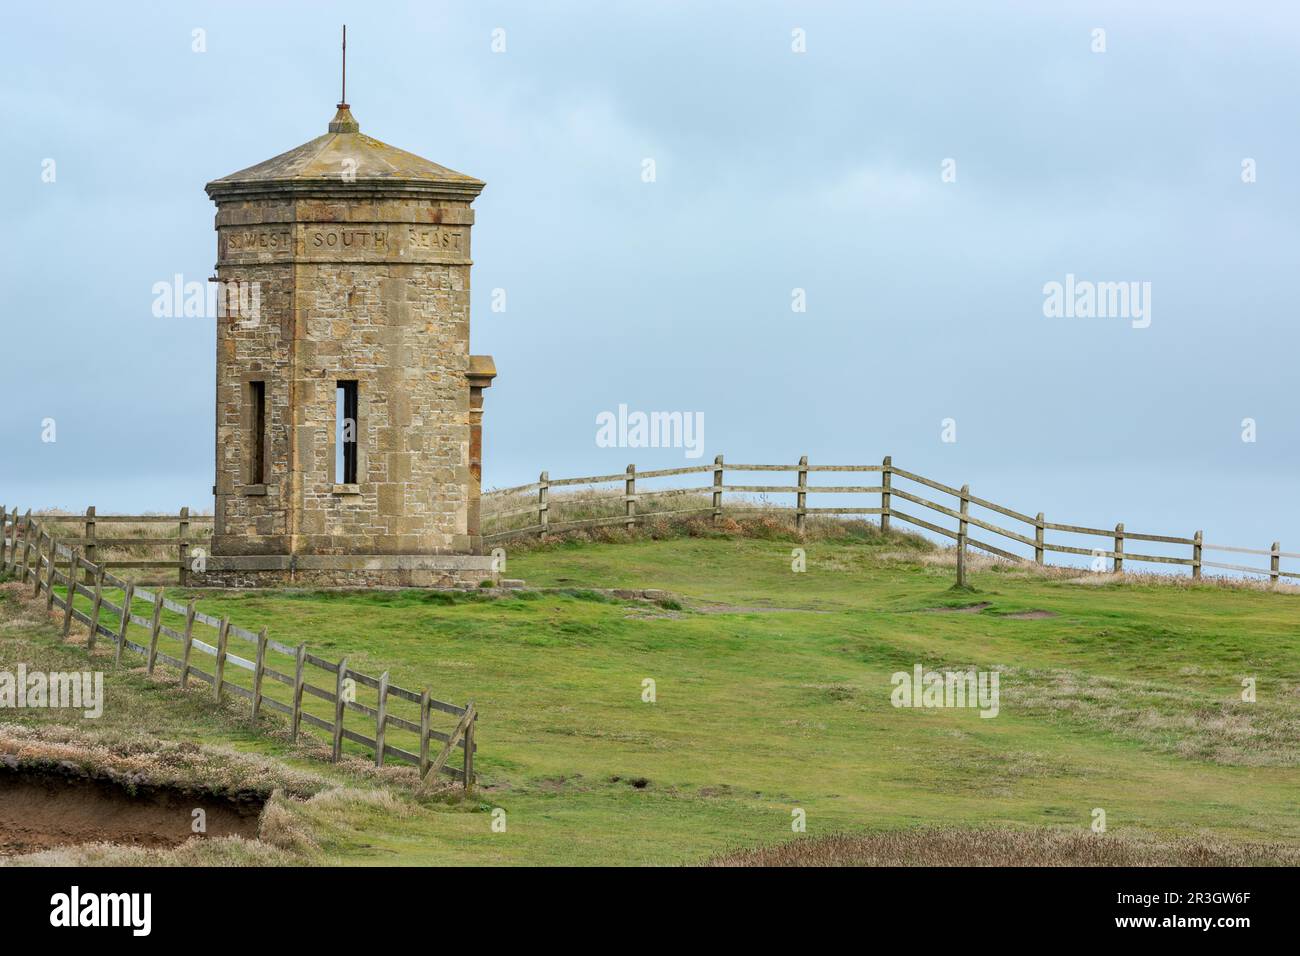 BUDE, CORNWALL, UK - AUGUST 15 : Compass Tower on the cliff top at Bude, Cornwall on August 15, 2013 Stock Photo